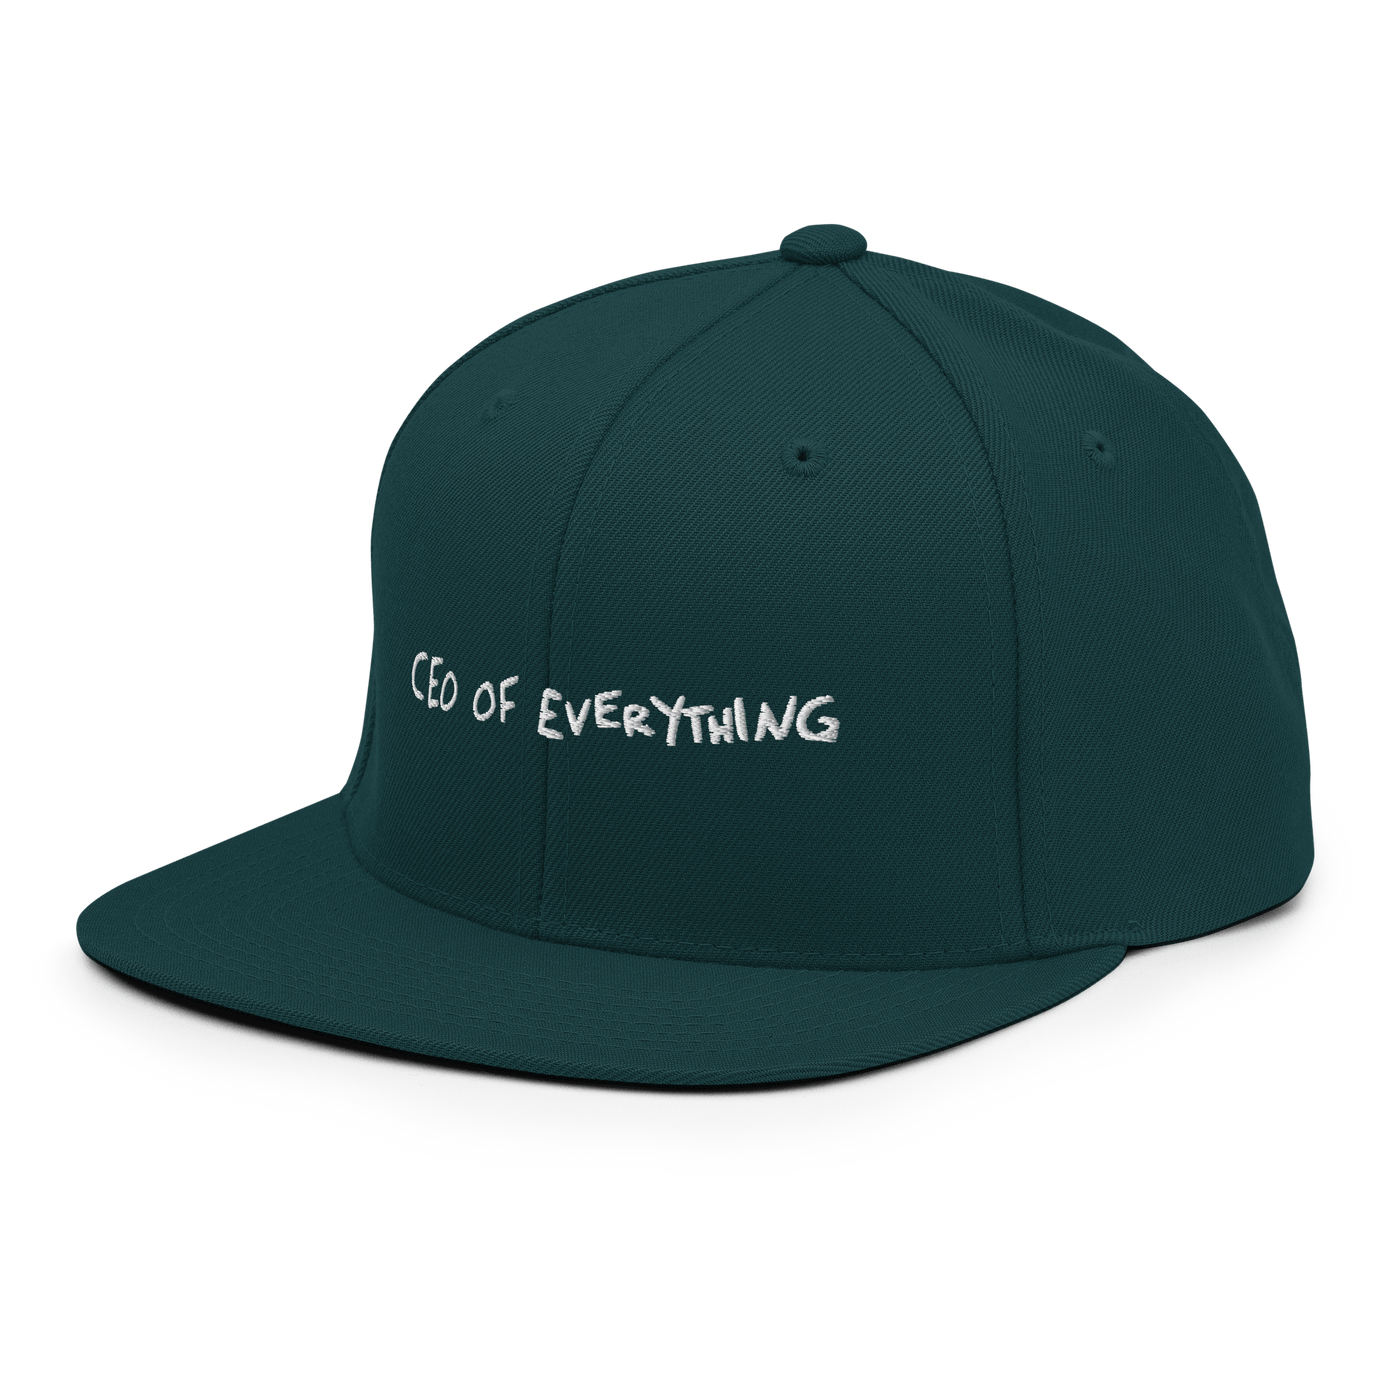 CEO of everything Snapback - Spruce - - Just Another Cap Store